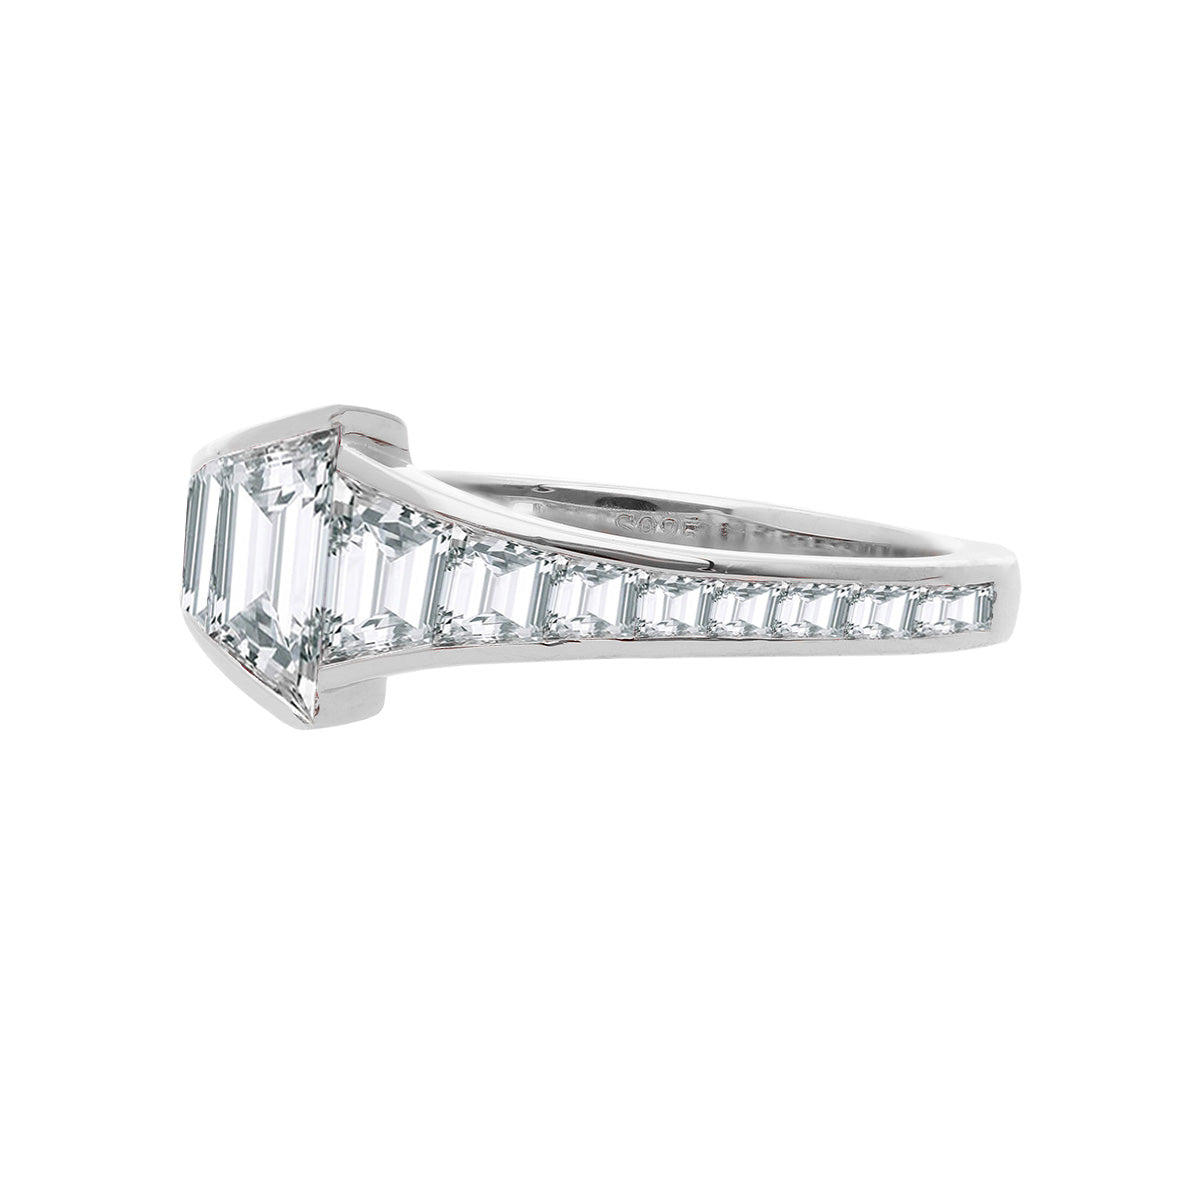 The White Sapphire Trapezoid Ring